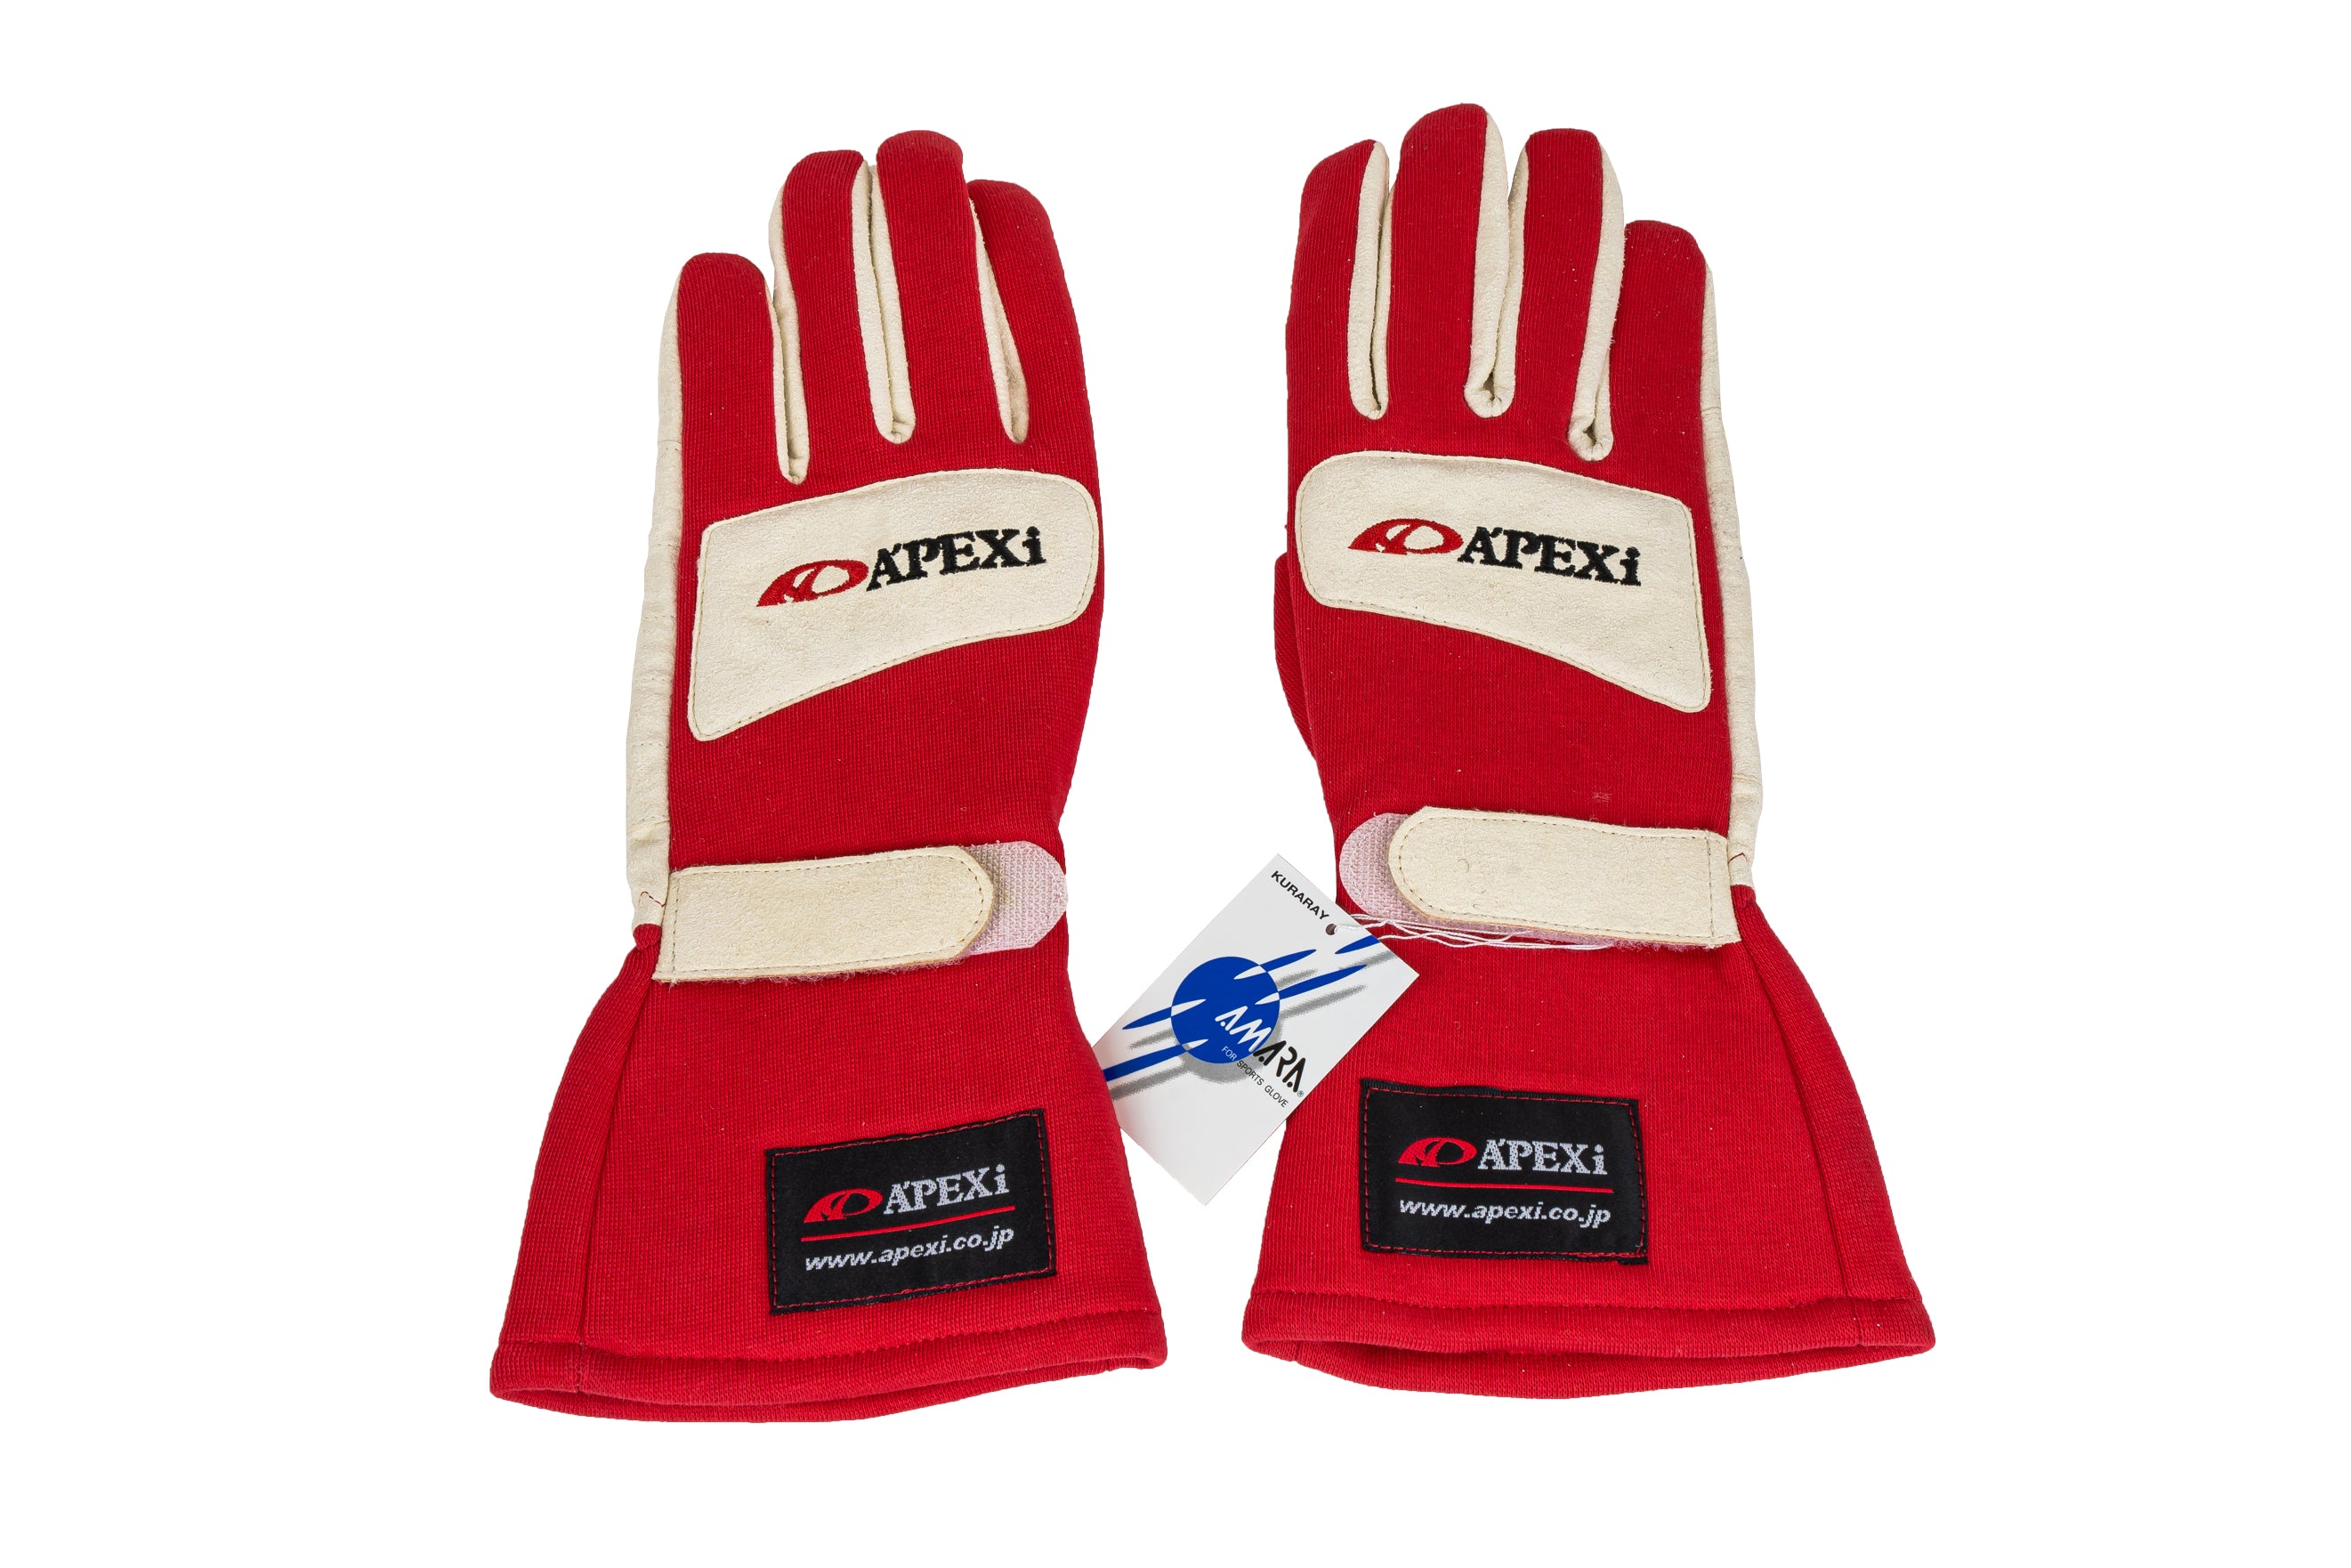 A'PEXi Racing Gloves - ** Final Run - Limited Quantities Available **